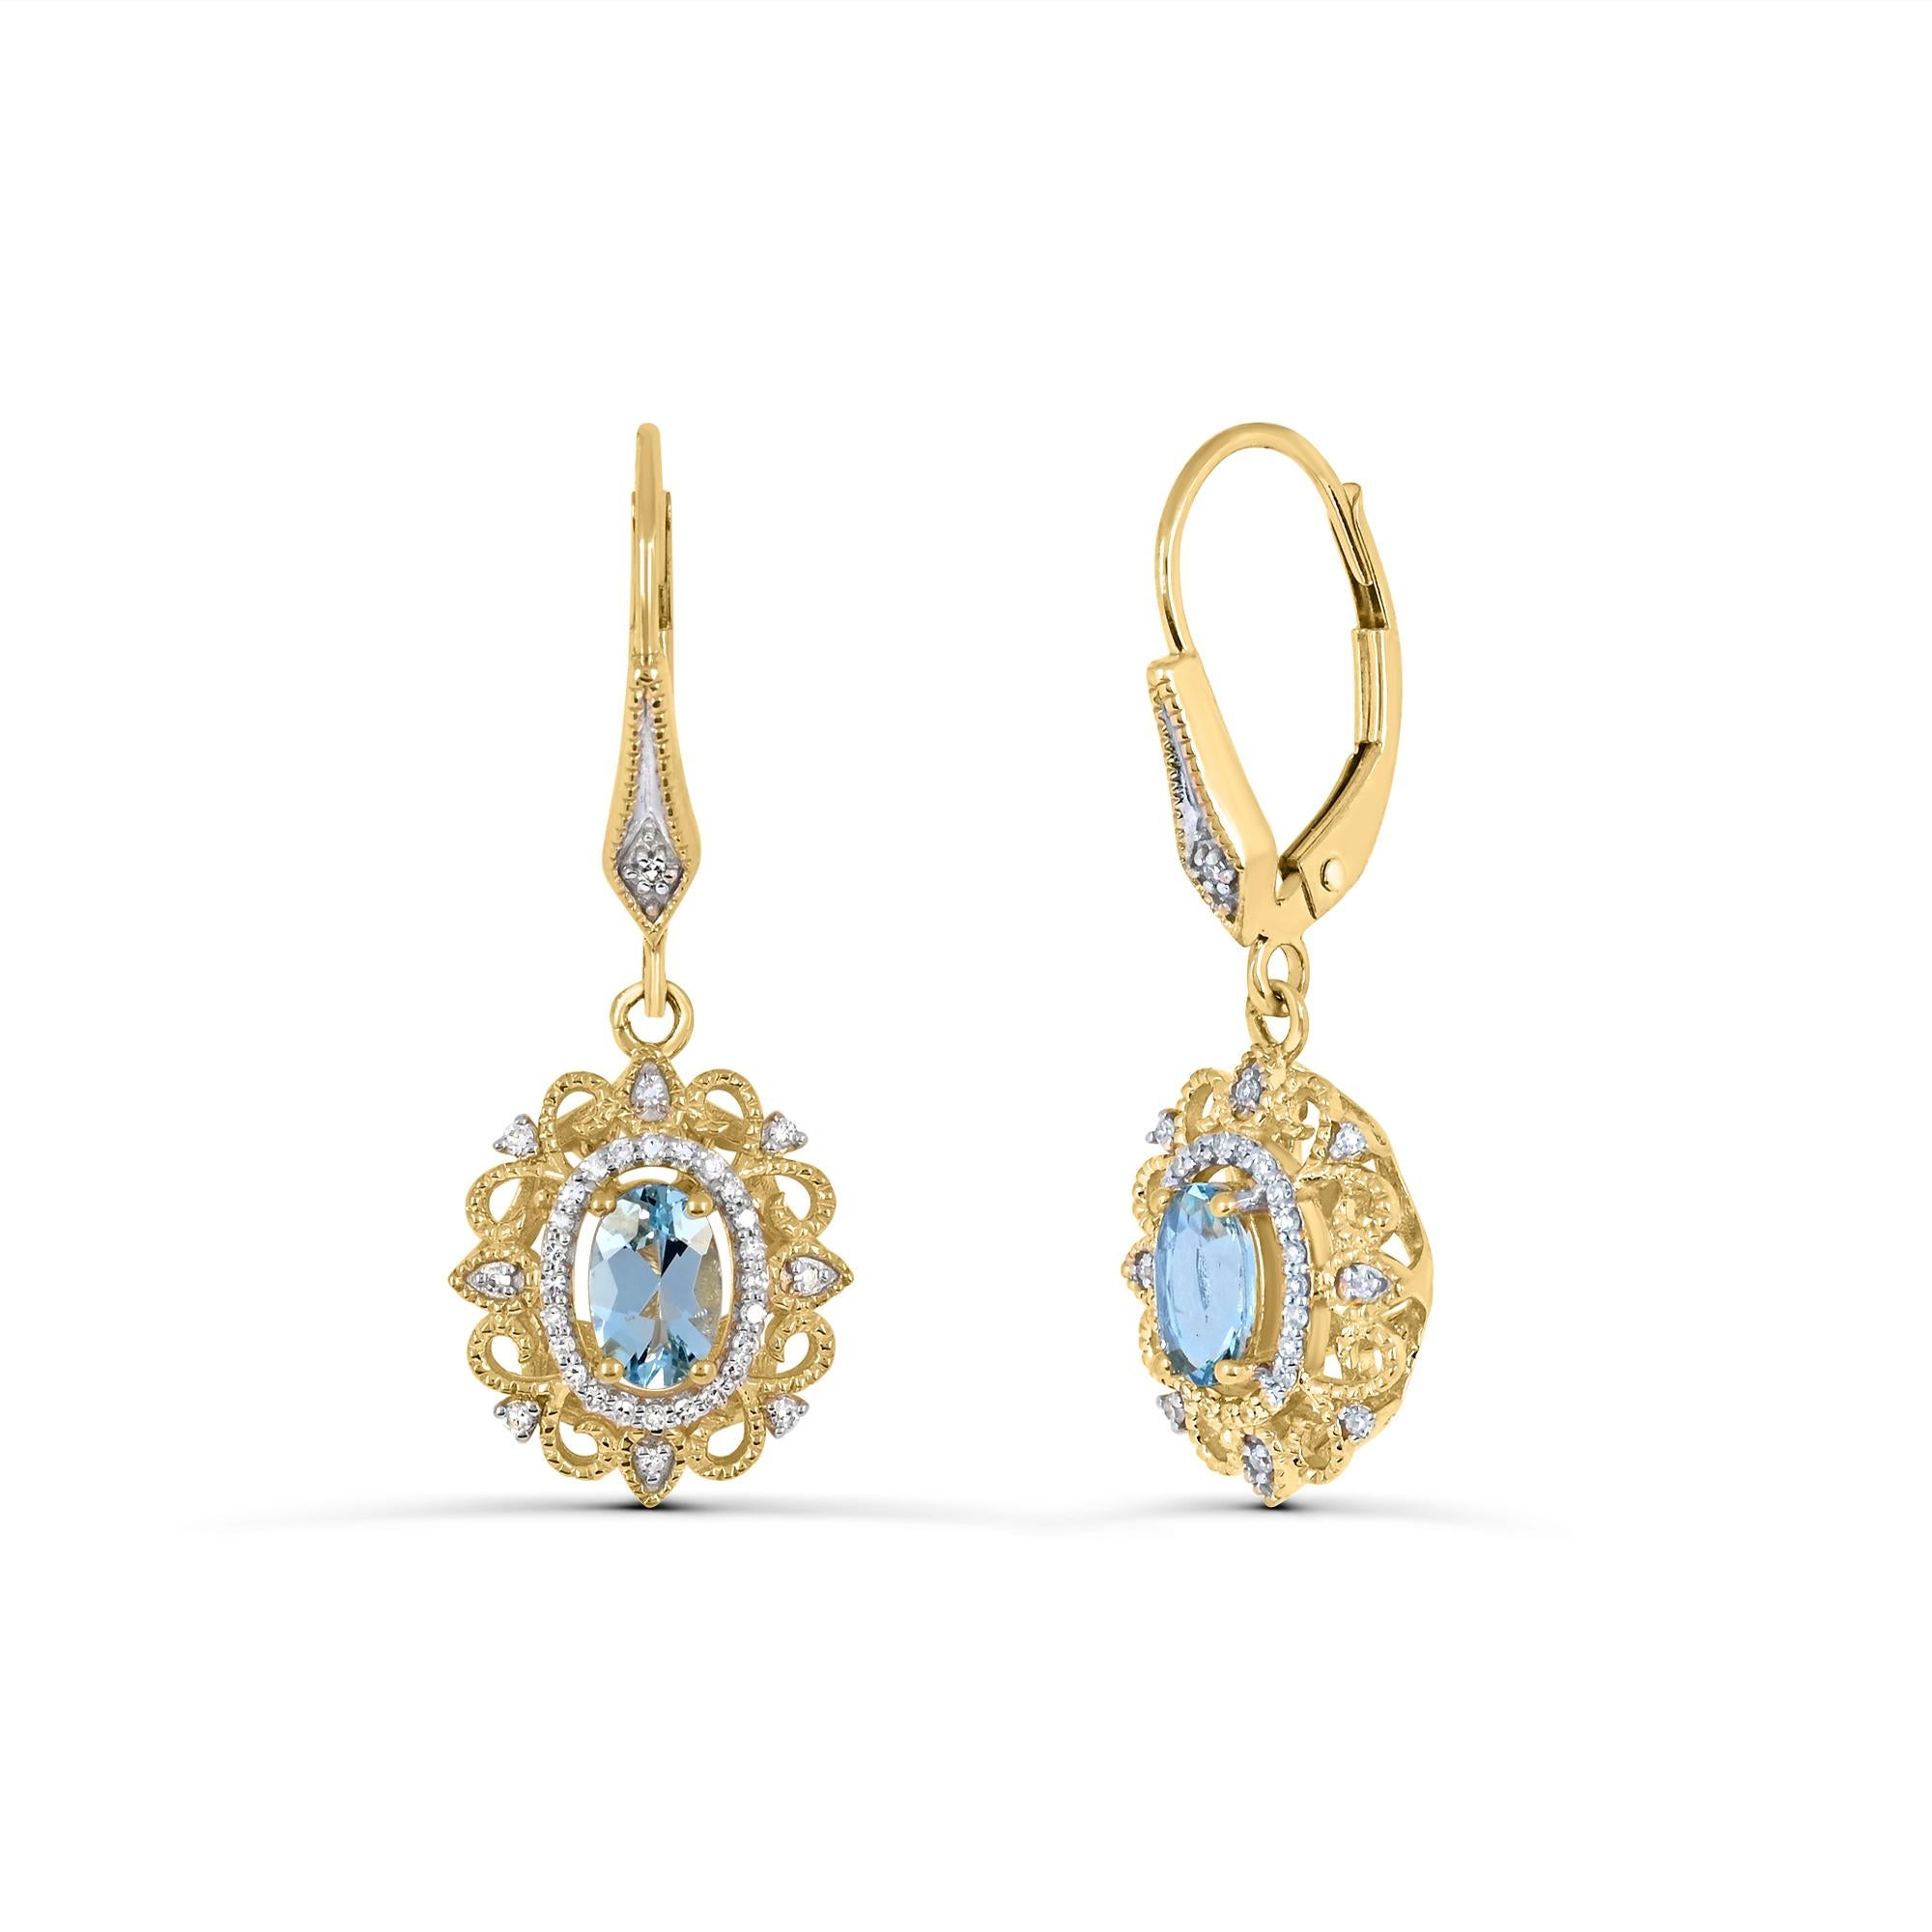 Crafted with exquisite detail, each of these earrings features a stunning oval aquamarine accompanied by sparkling round single cut white diamonds. The 14K yellow gold setting adds touches of luxury and sophistication. With convenient lever-back